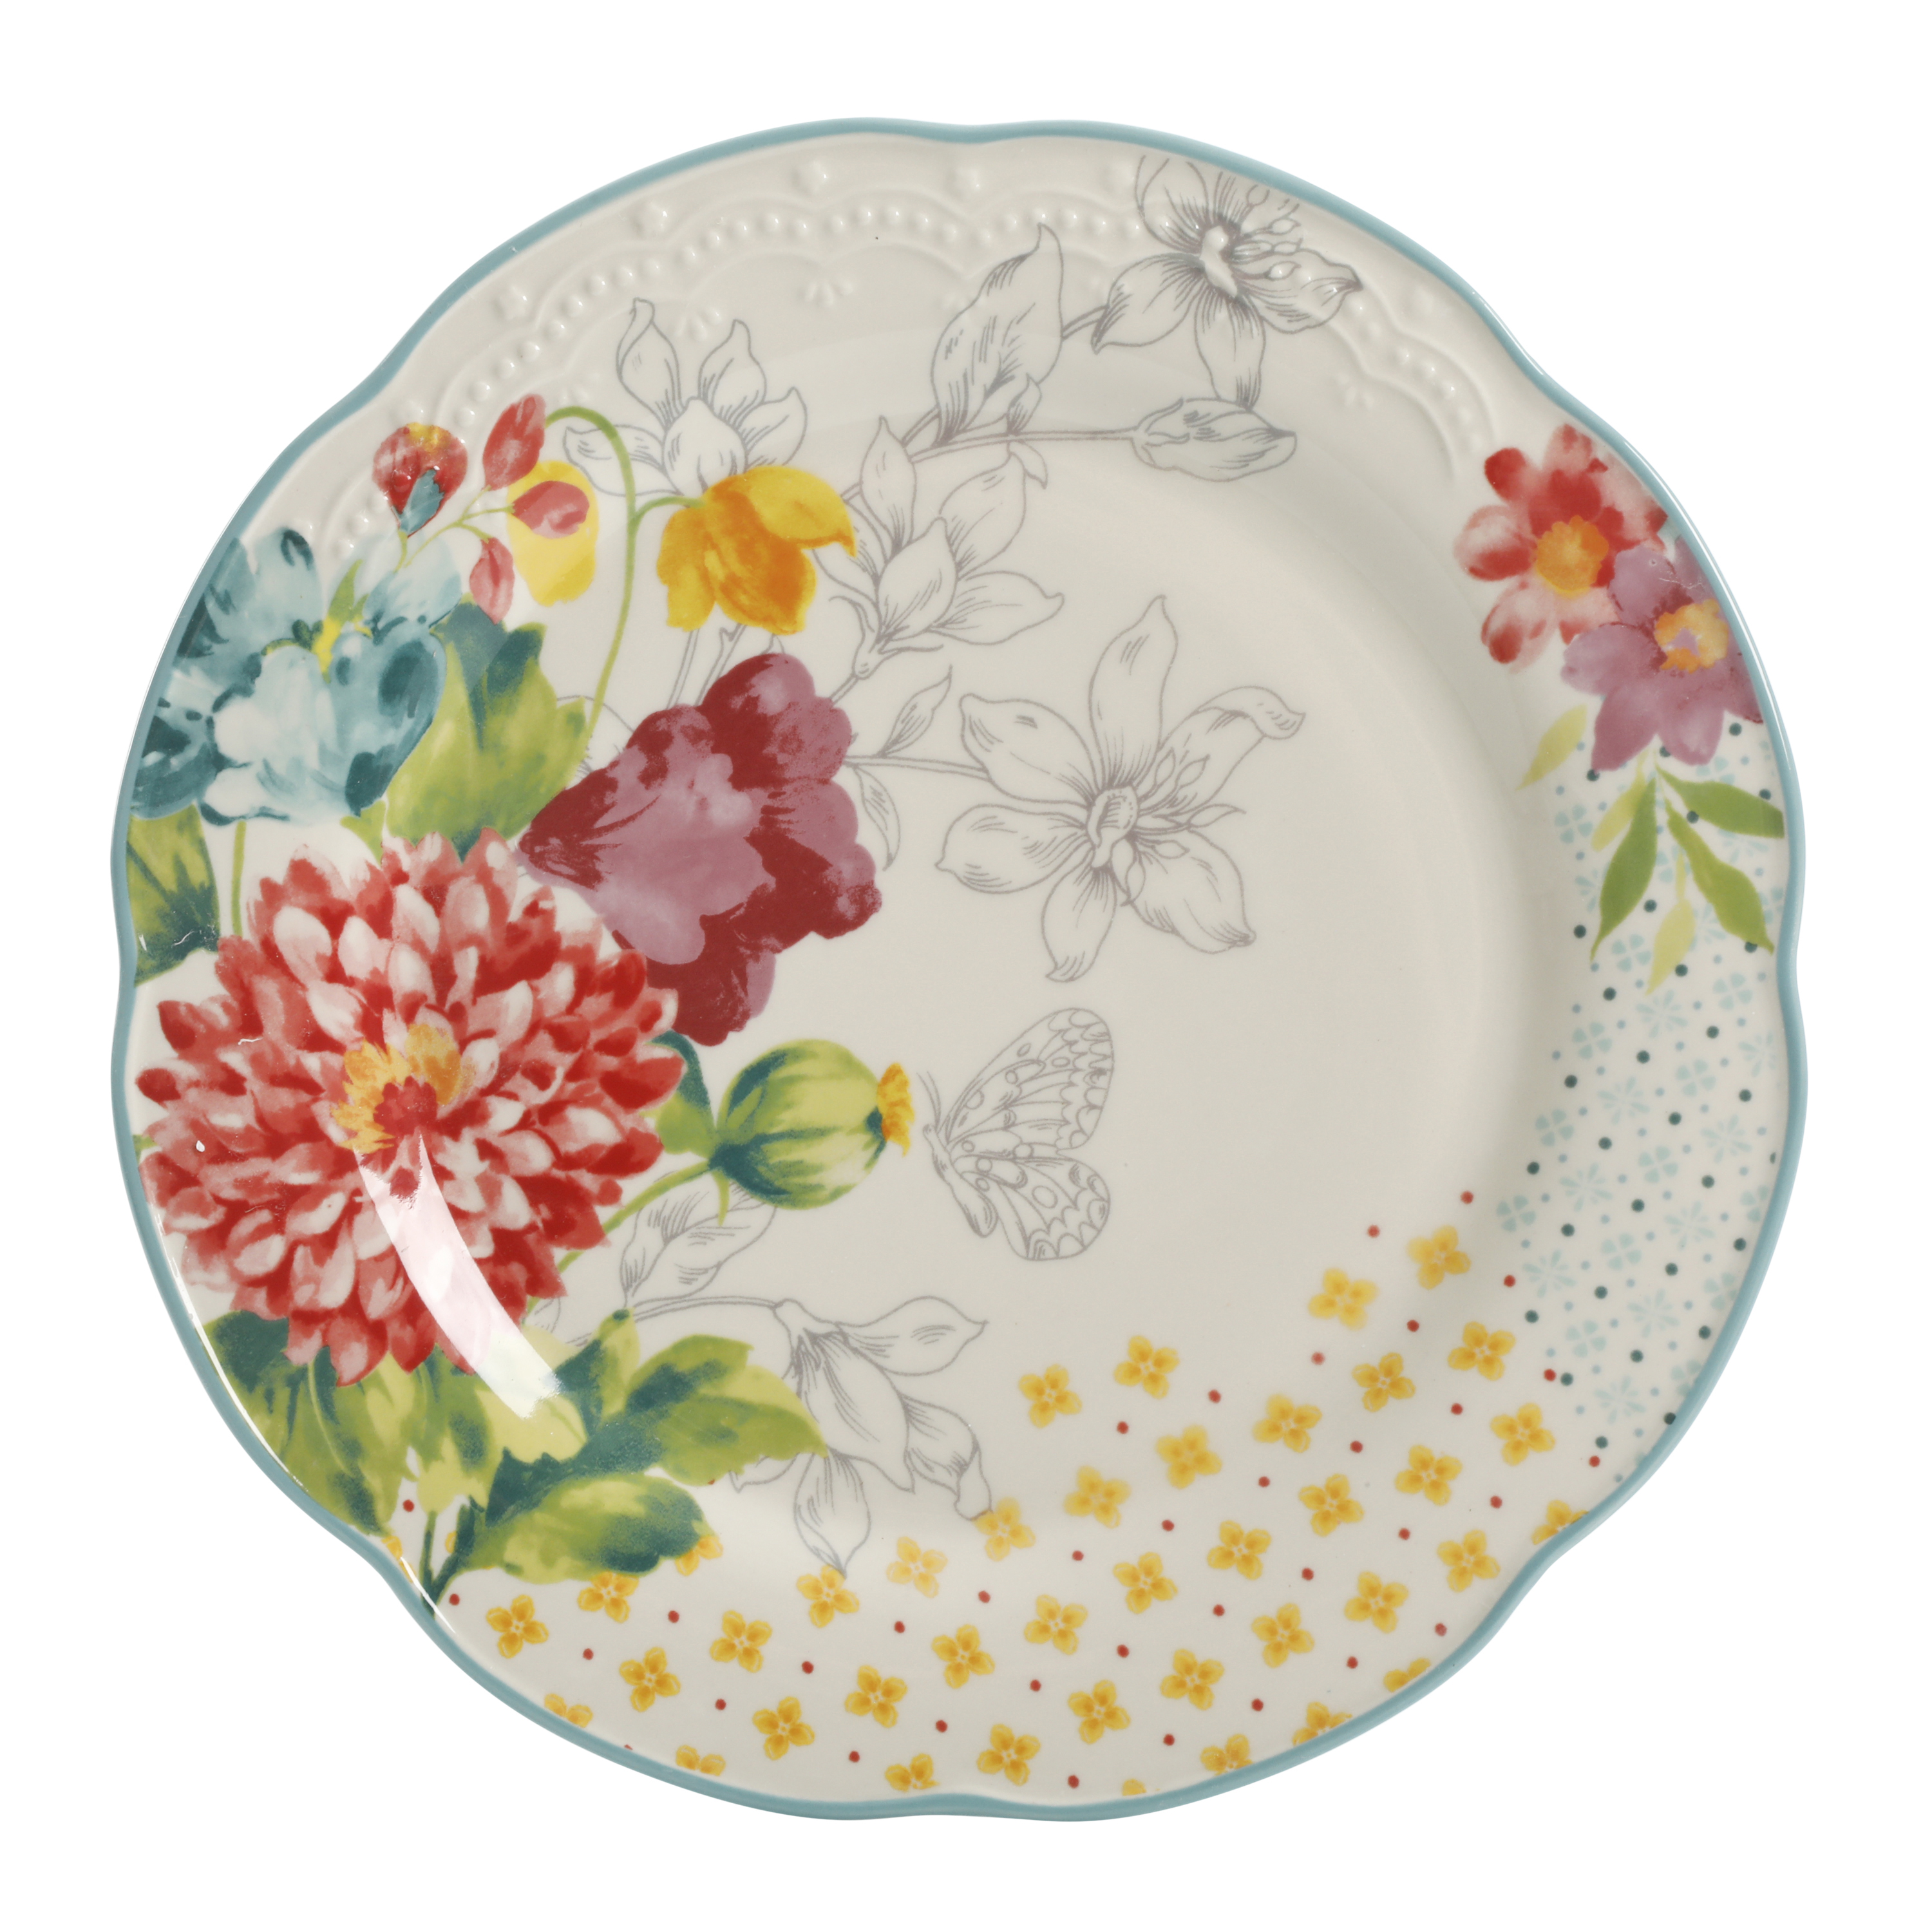 The Pioneer Woman Blooming Bouquet White Ceramic 12-Piece Dinnerware Set - image 4 of 7